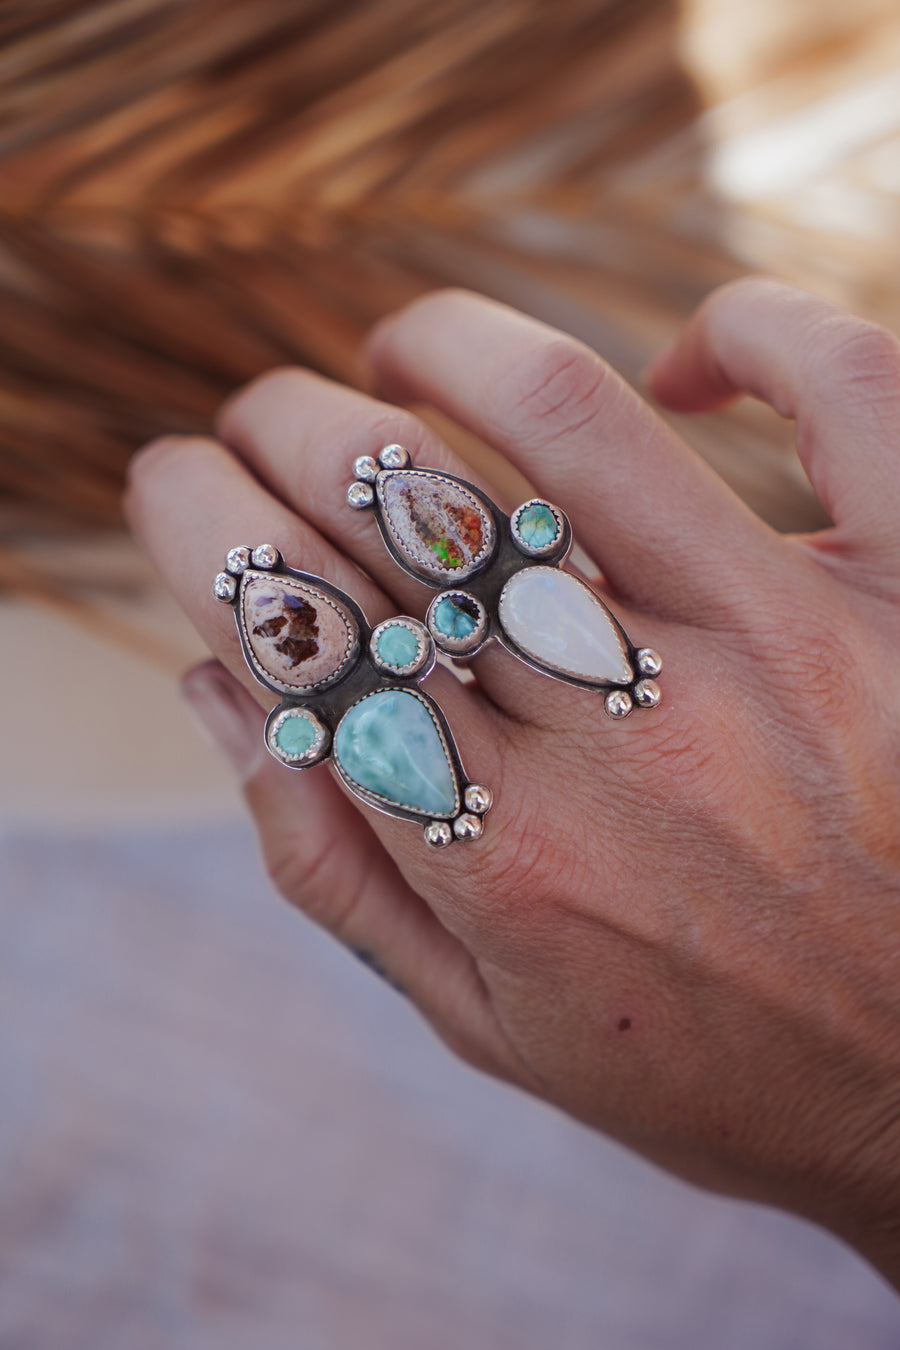 Enchantress Ring in Mexican Fire Opal, Rainbow Moonstone, & Sierra Nevada Turquoise (Size 8.5)